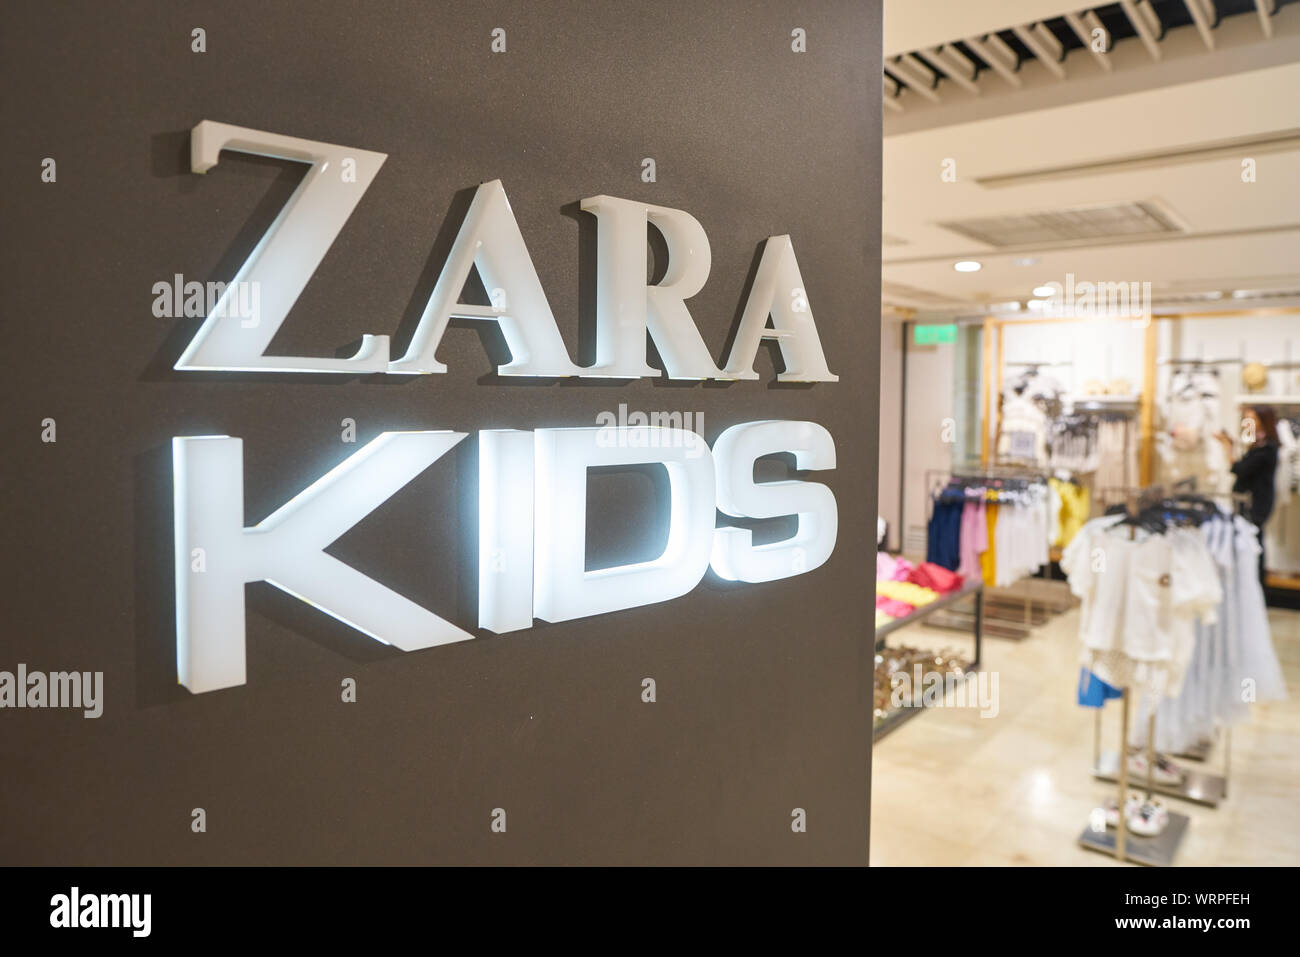 Zara Kids Shop High Resolution Stock Photography and Images - Alamy